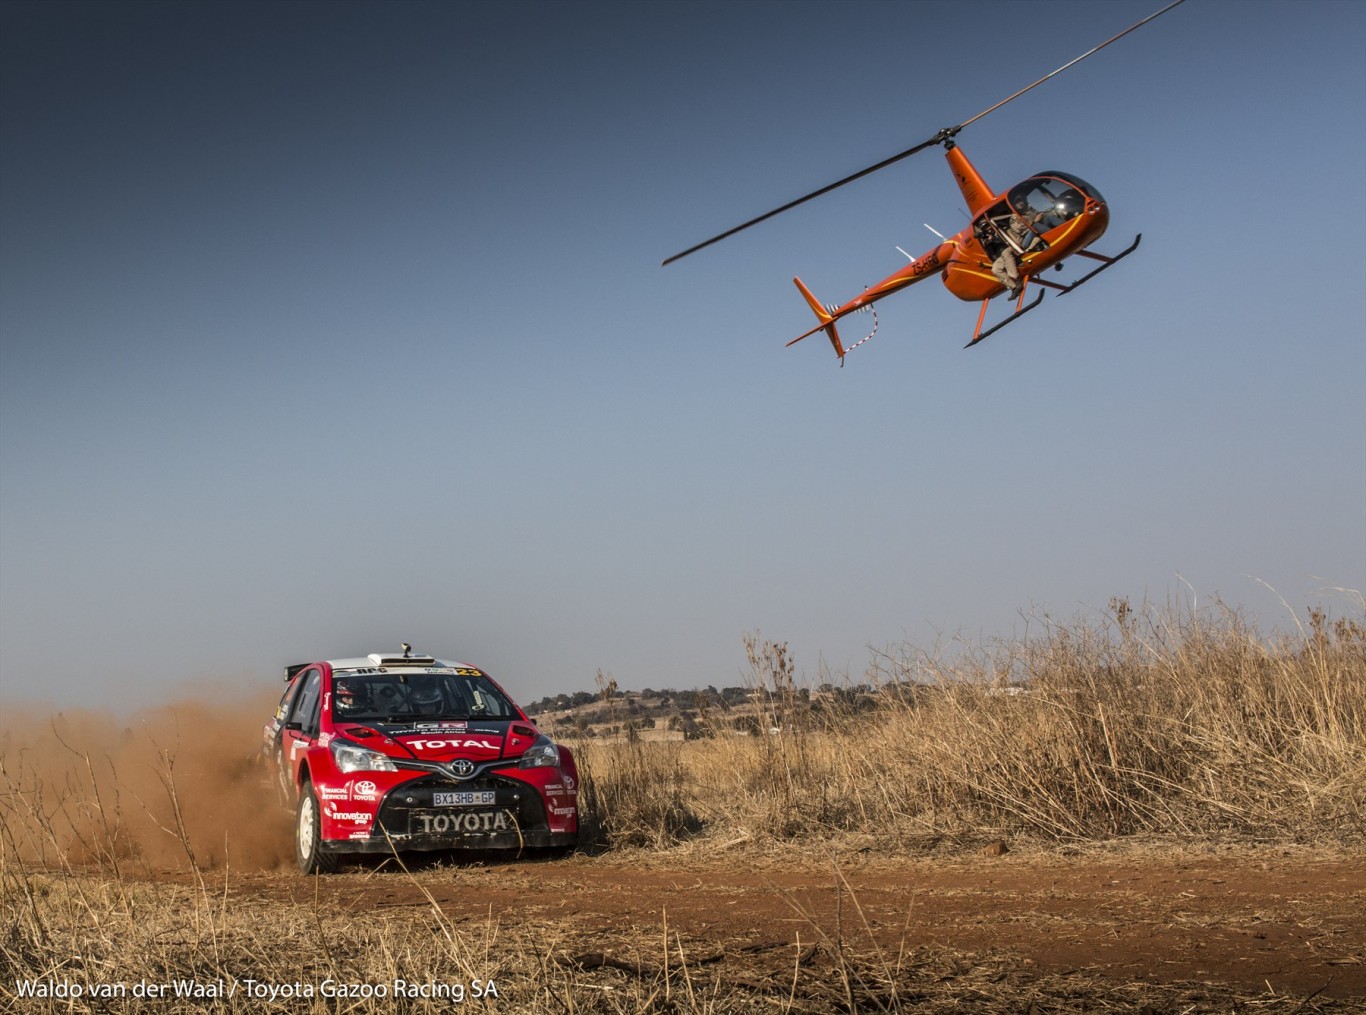 Poulter / Coetzee make it 5 in a row for Toyota Gazoo Racing SA